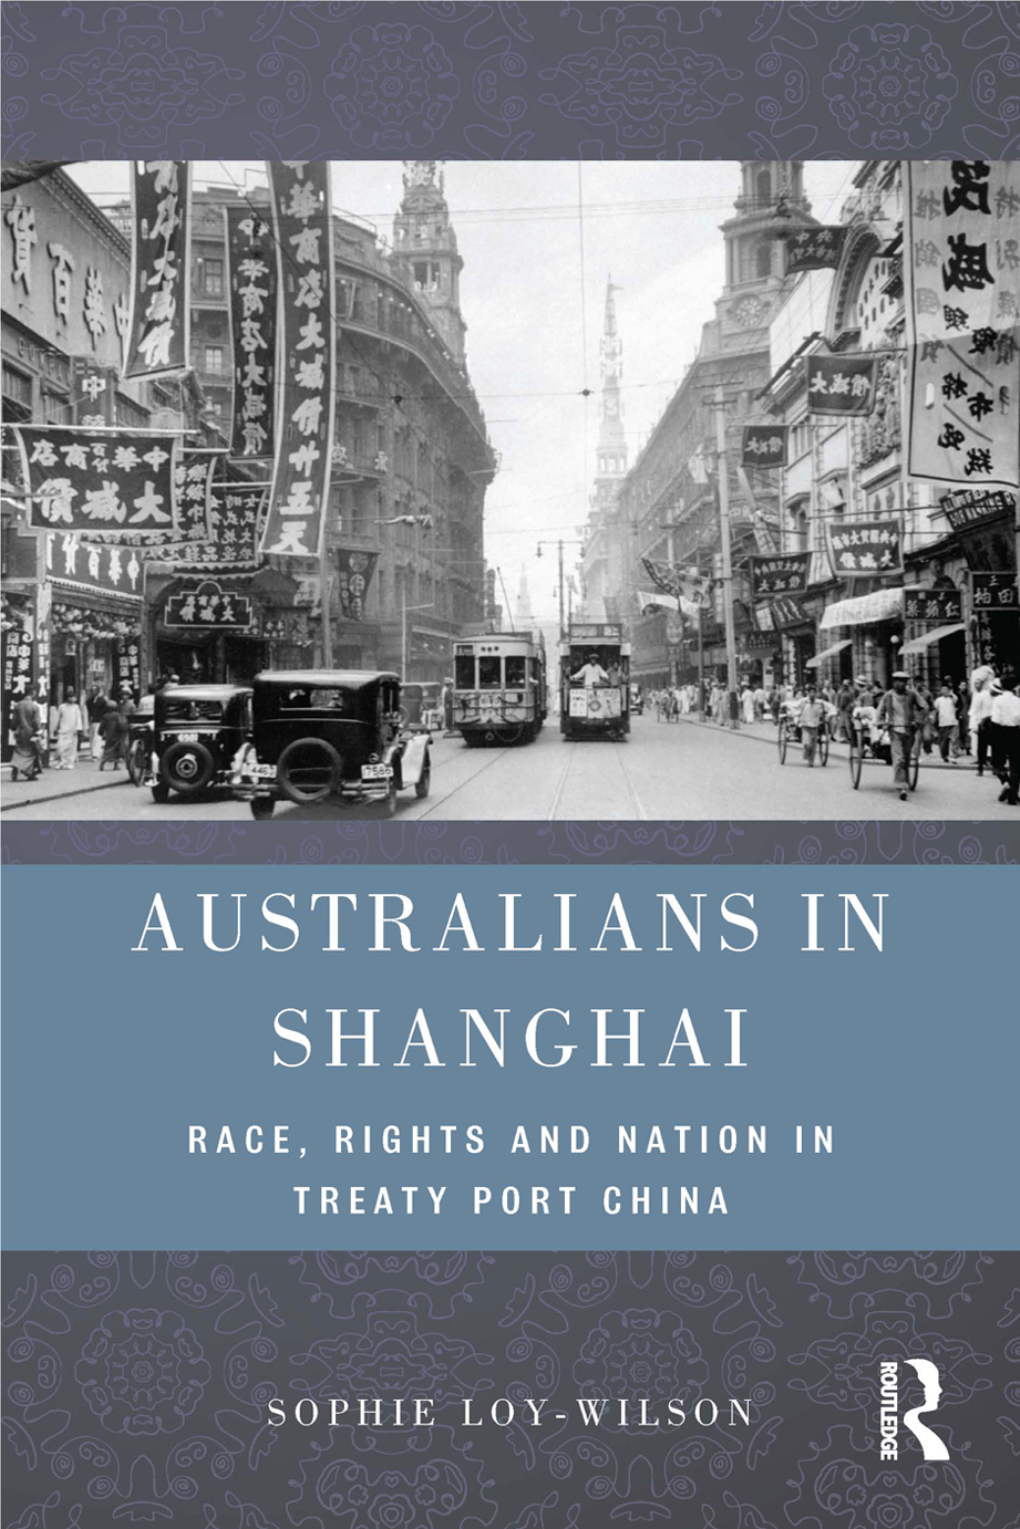 Australians in Shanghai: Race, Rights and Nation in Treaty Port China / by Sophie Loy-Wilson